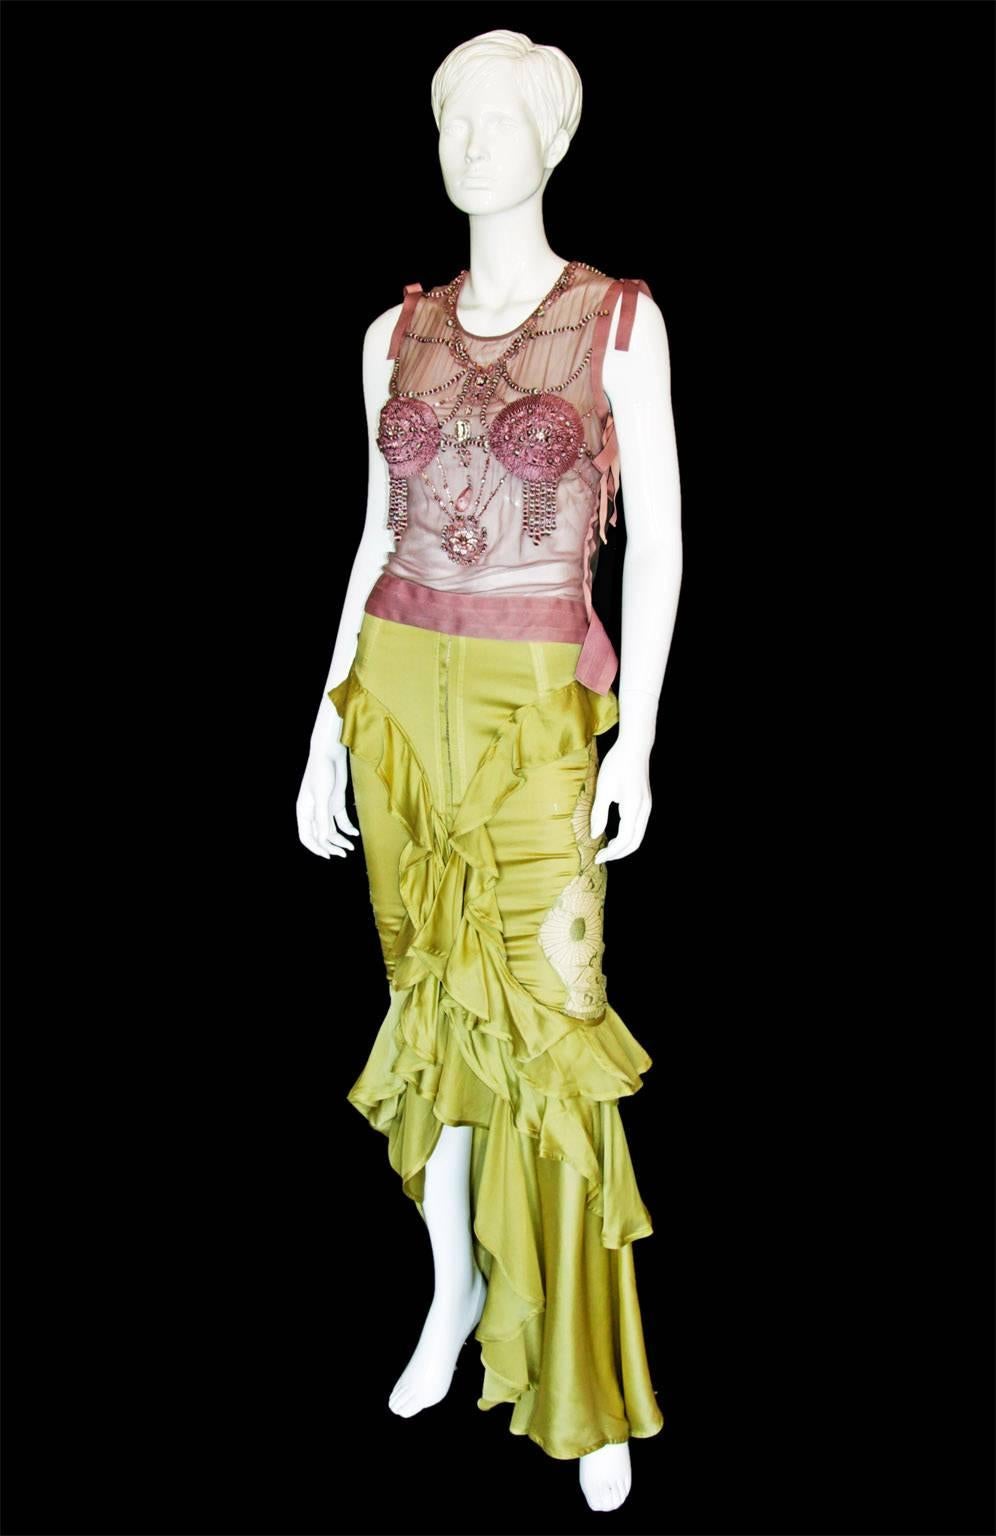 Amazing Tom Ford YSL Rive Gauche FW 2003 Chartreuse Silk Runway Skirt!

Who could ever forget Tom Ford's fall/winter 2003 show for Yves Saint Laurent Rive Gauche? Well, these were two of the absolute 